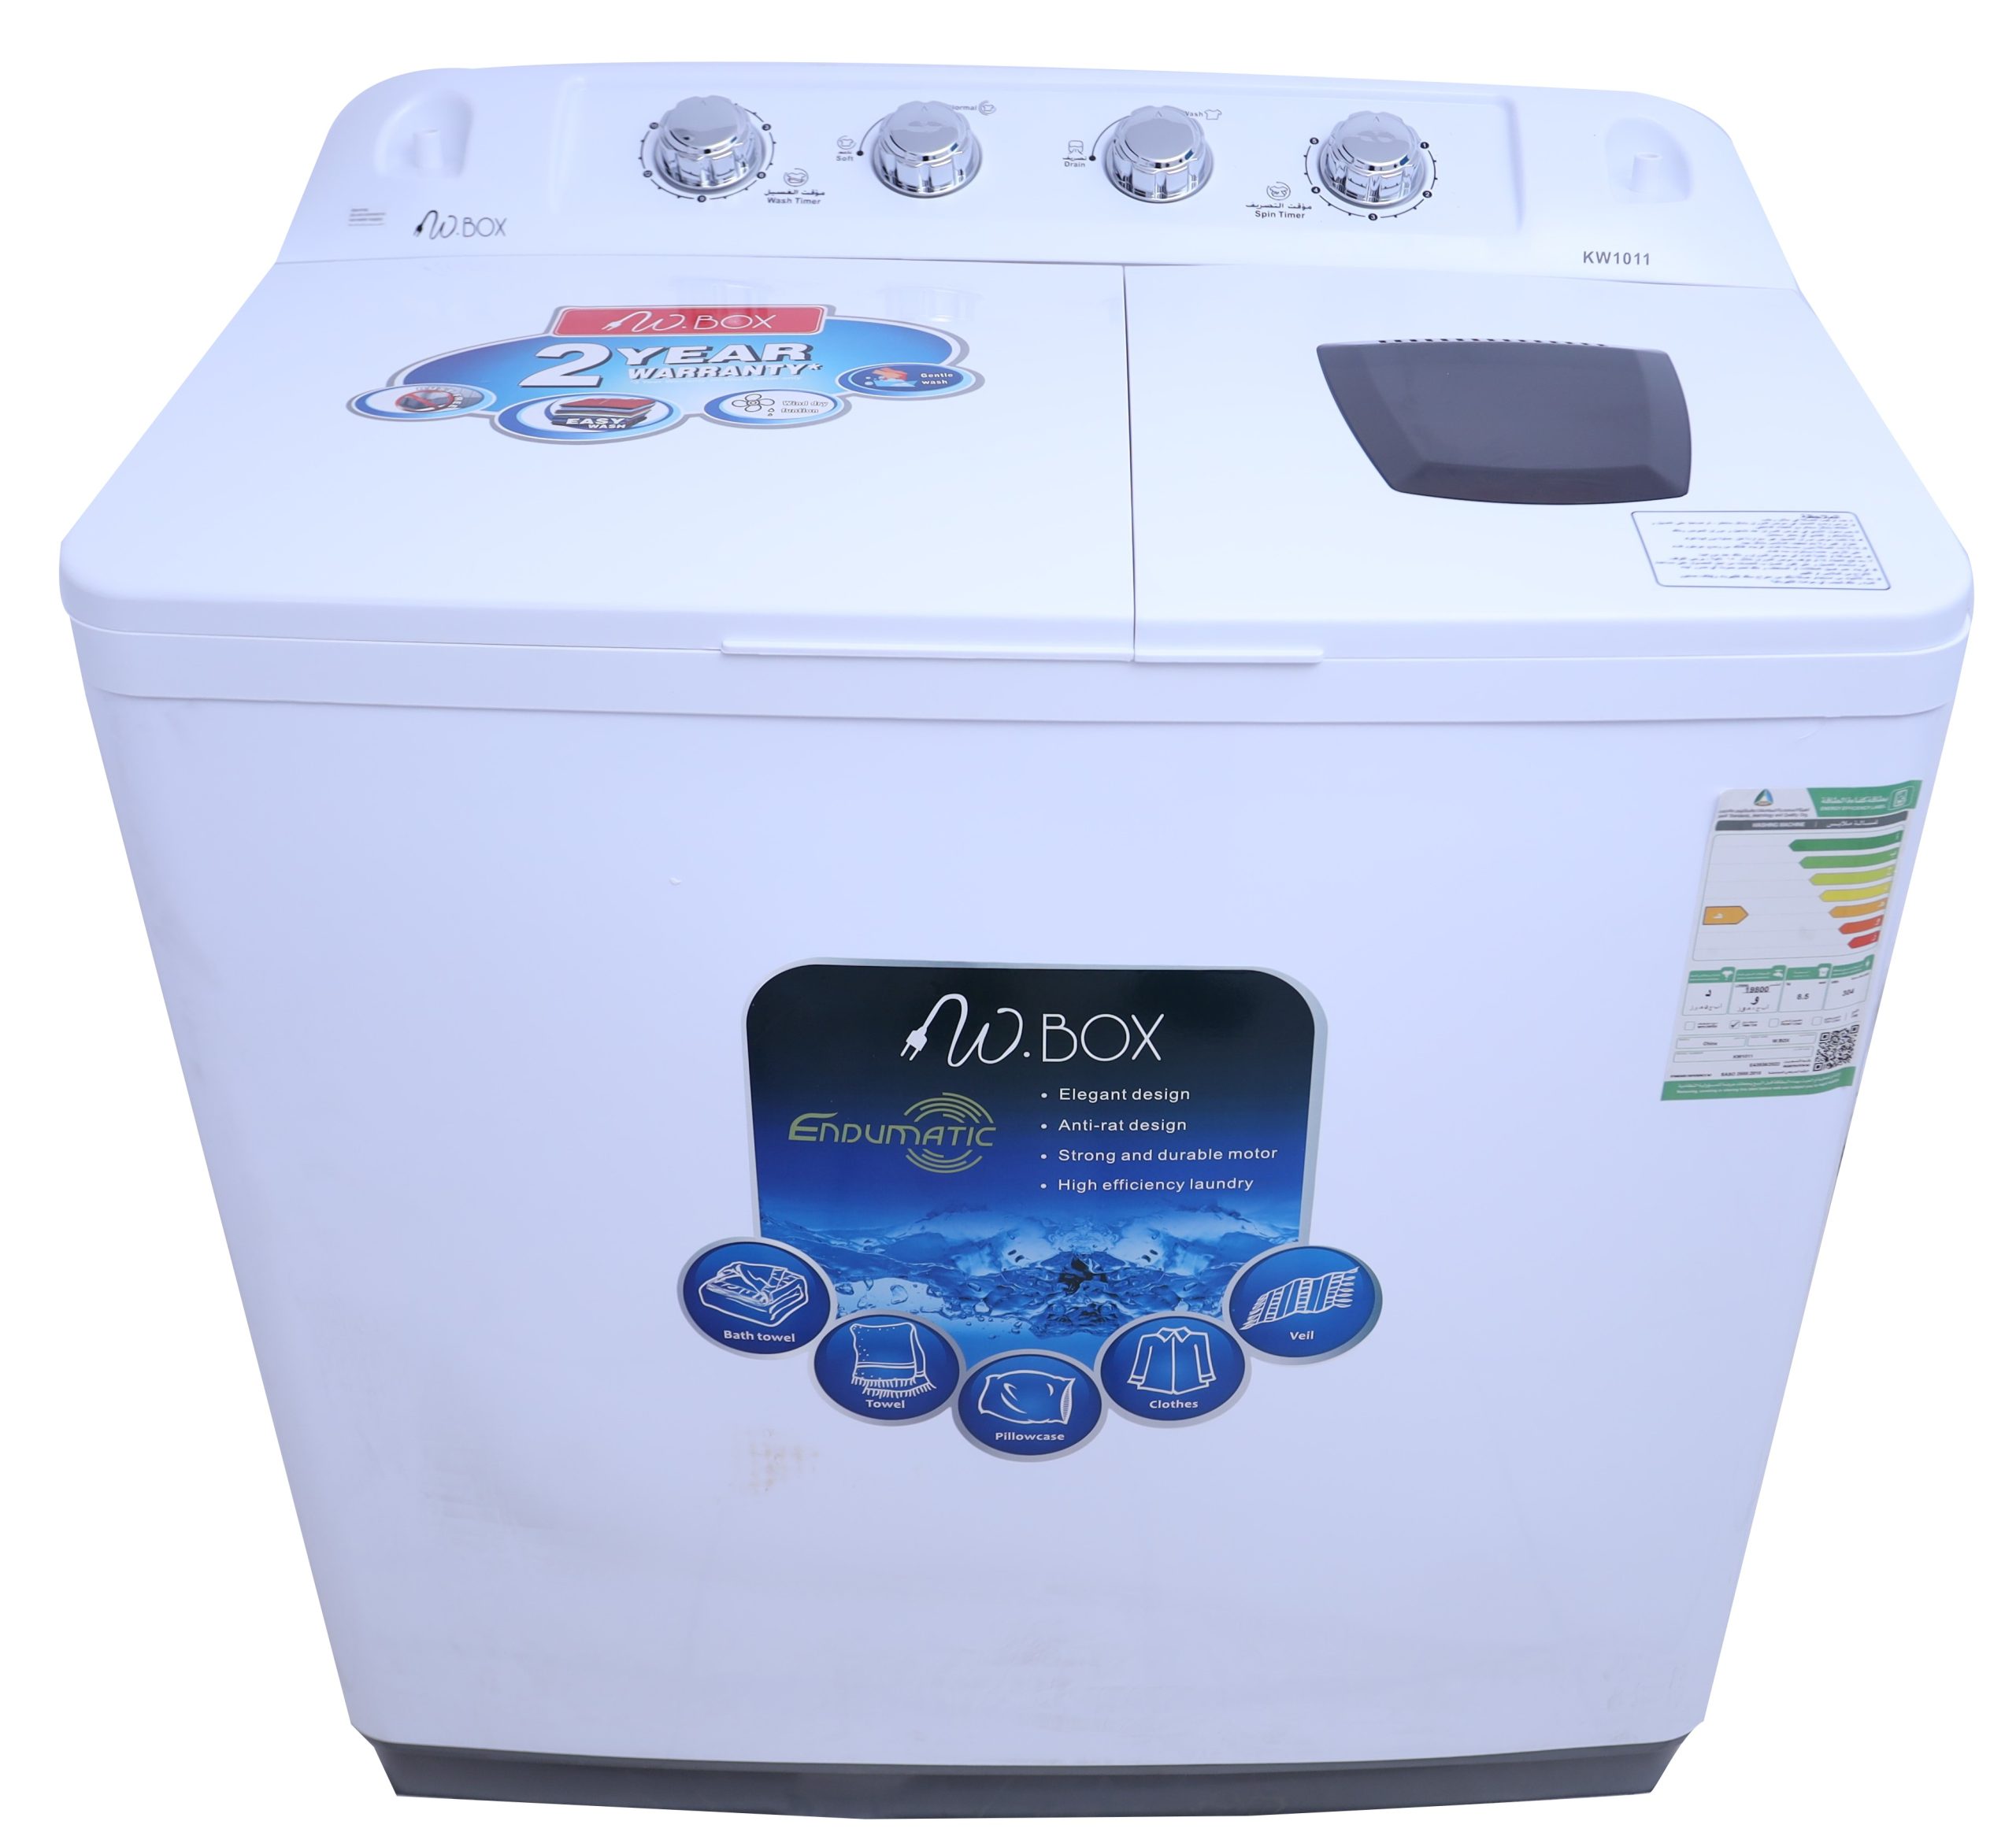 Air clothes dryer from Raco W.BOX